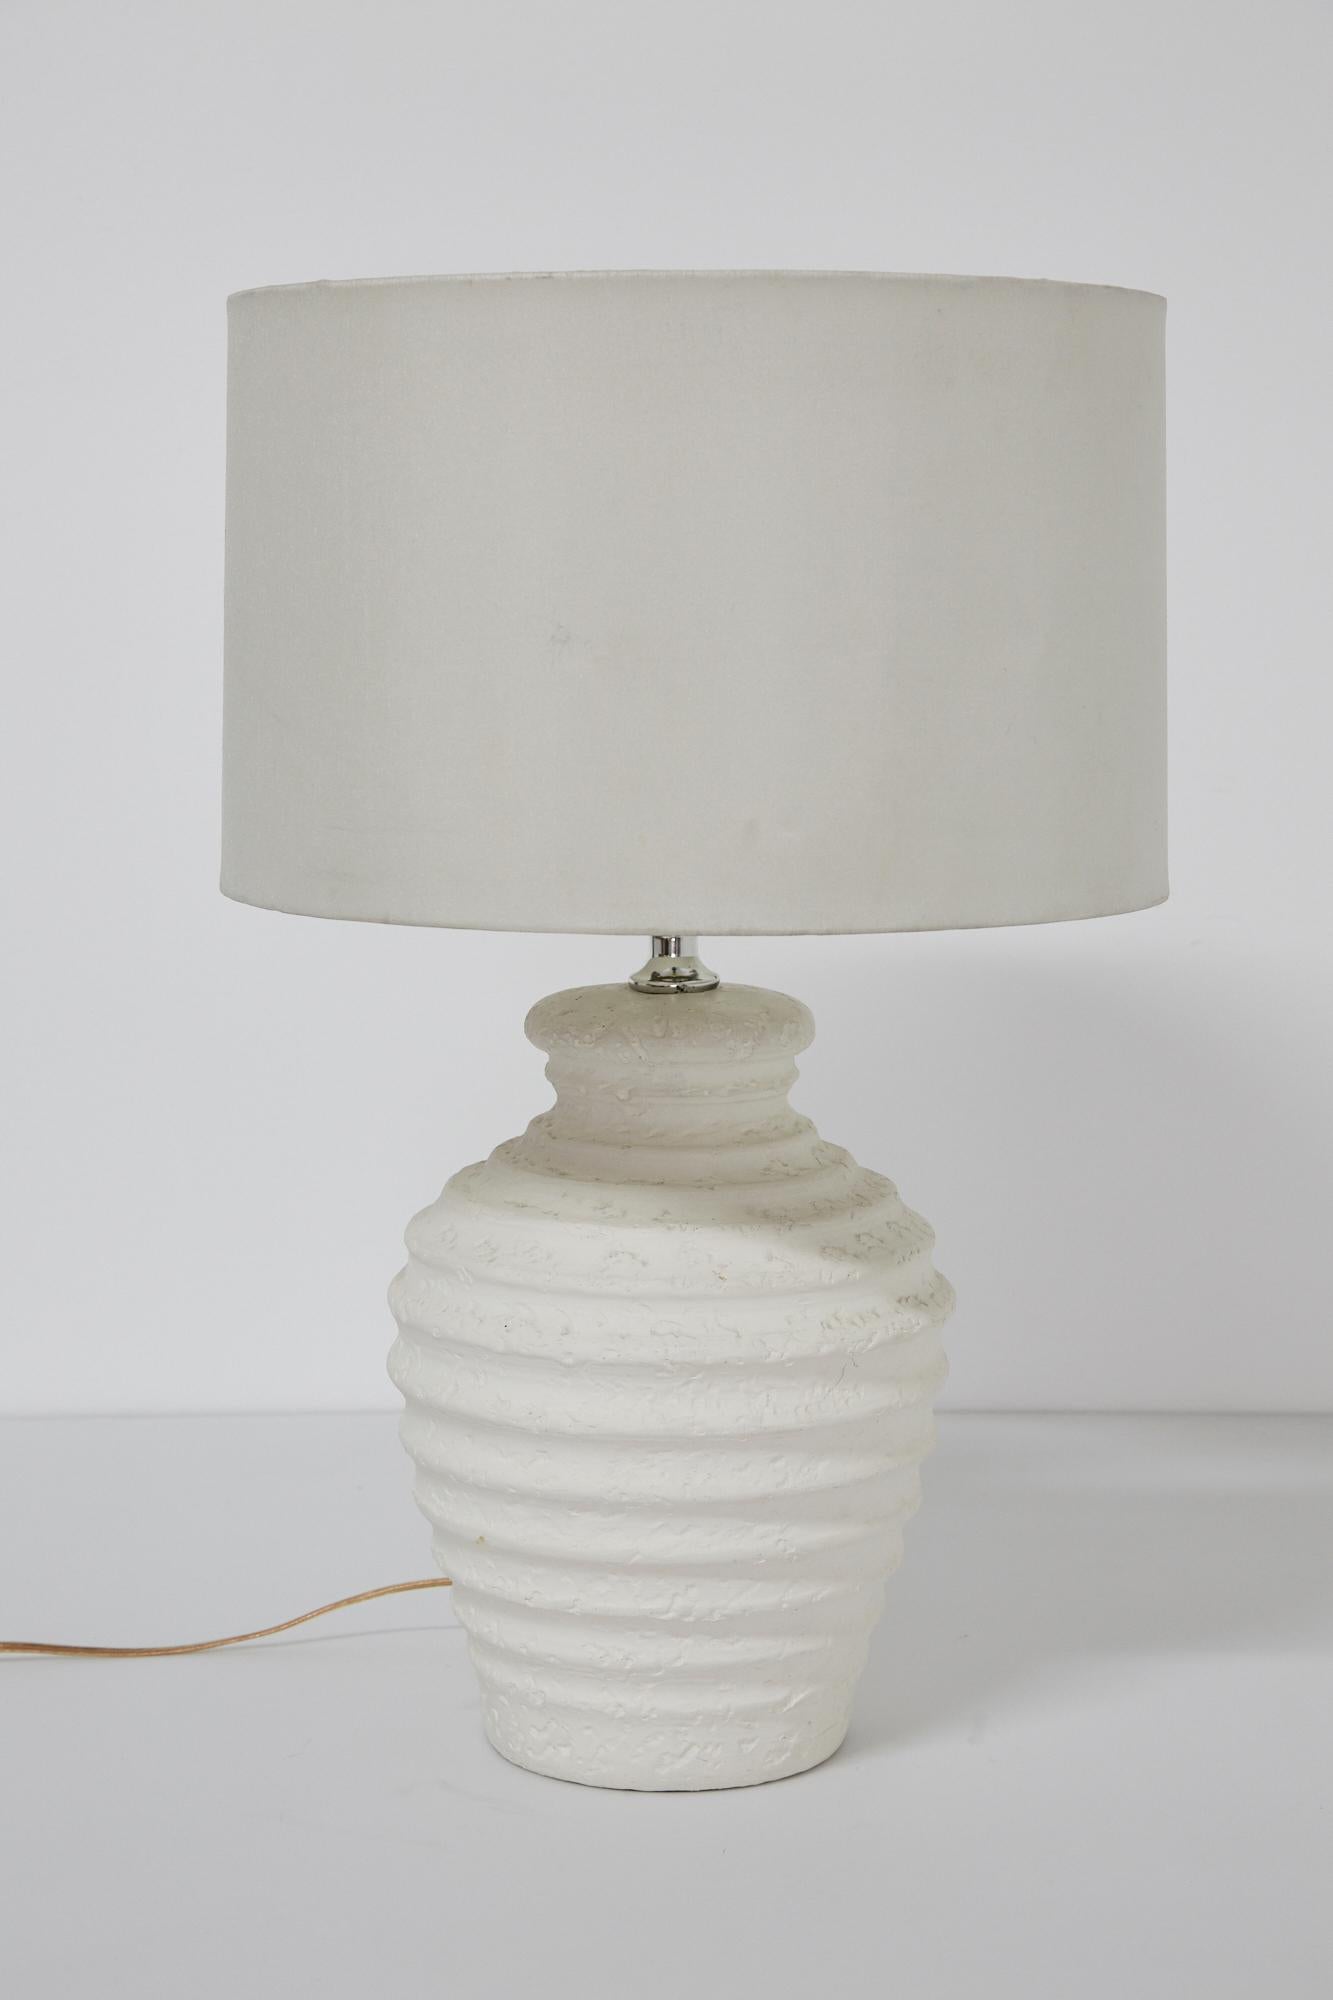 Urn-shaped distressed plaster table lamp with horizontal ribbing. Chrome neck. Signed to back of lamp with Elite '93.

Body only measures 13.5